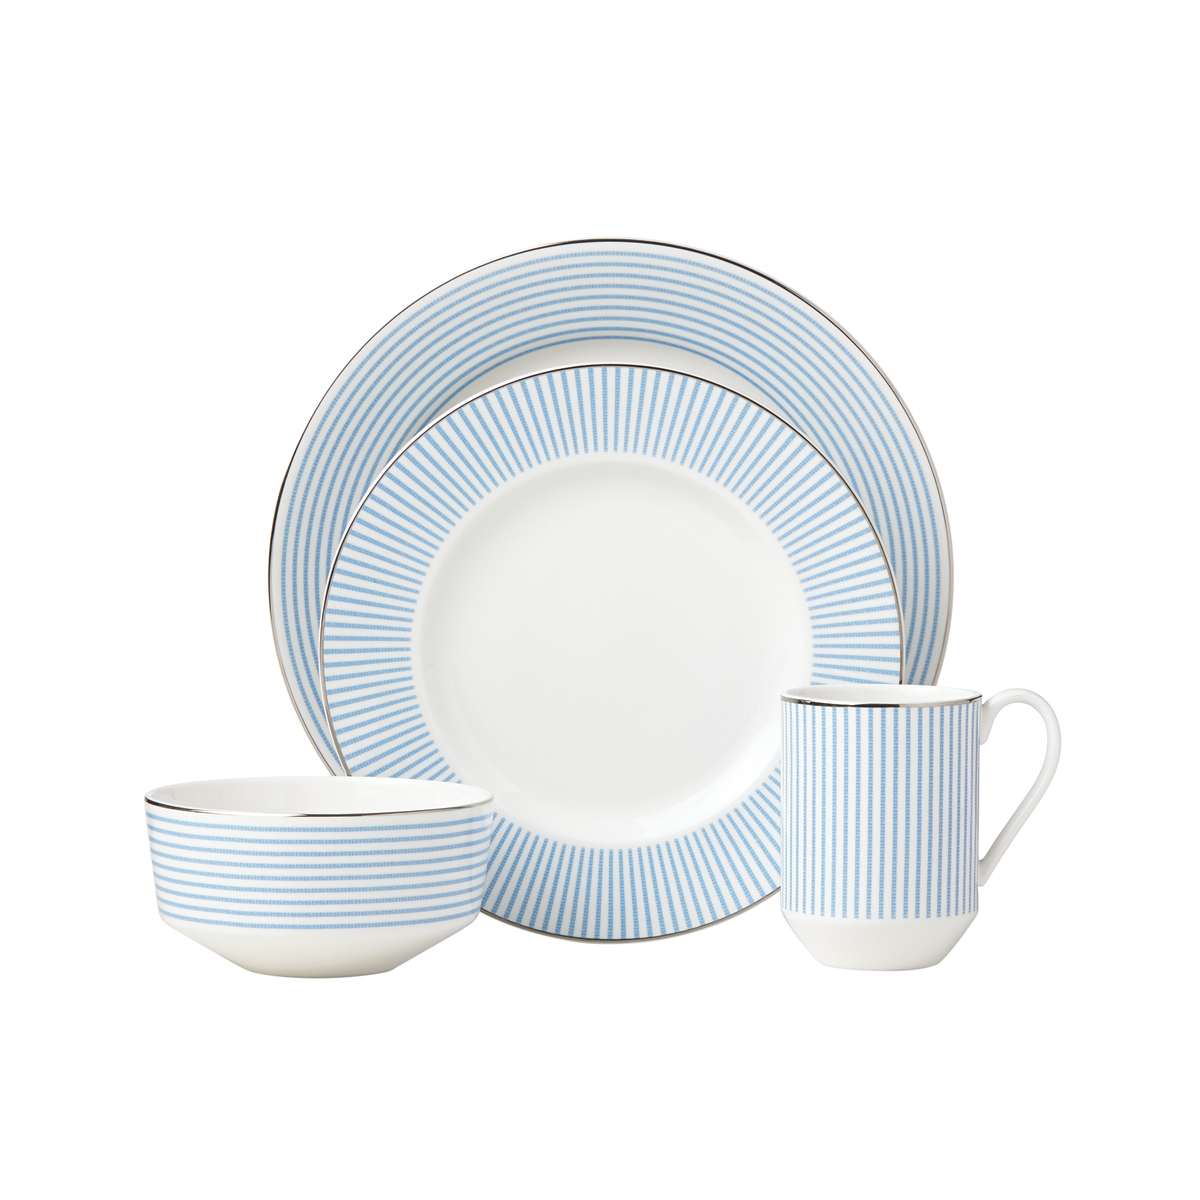 Kate Spade China by Lenox, Laurel St 4 Piece Place Setting